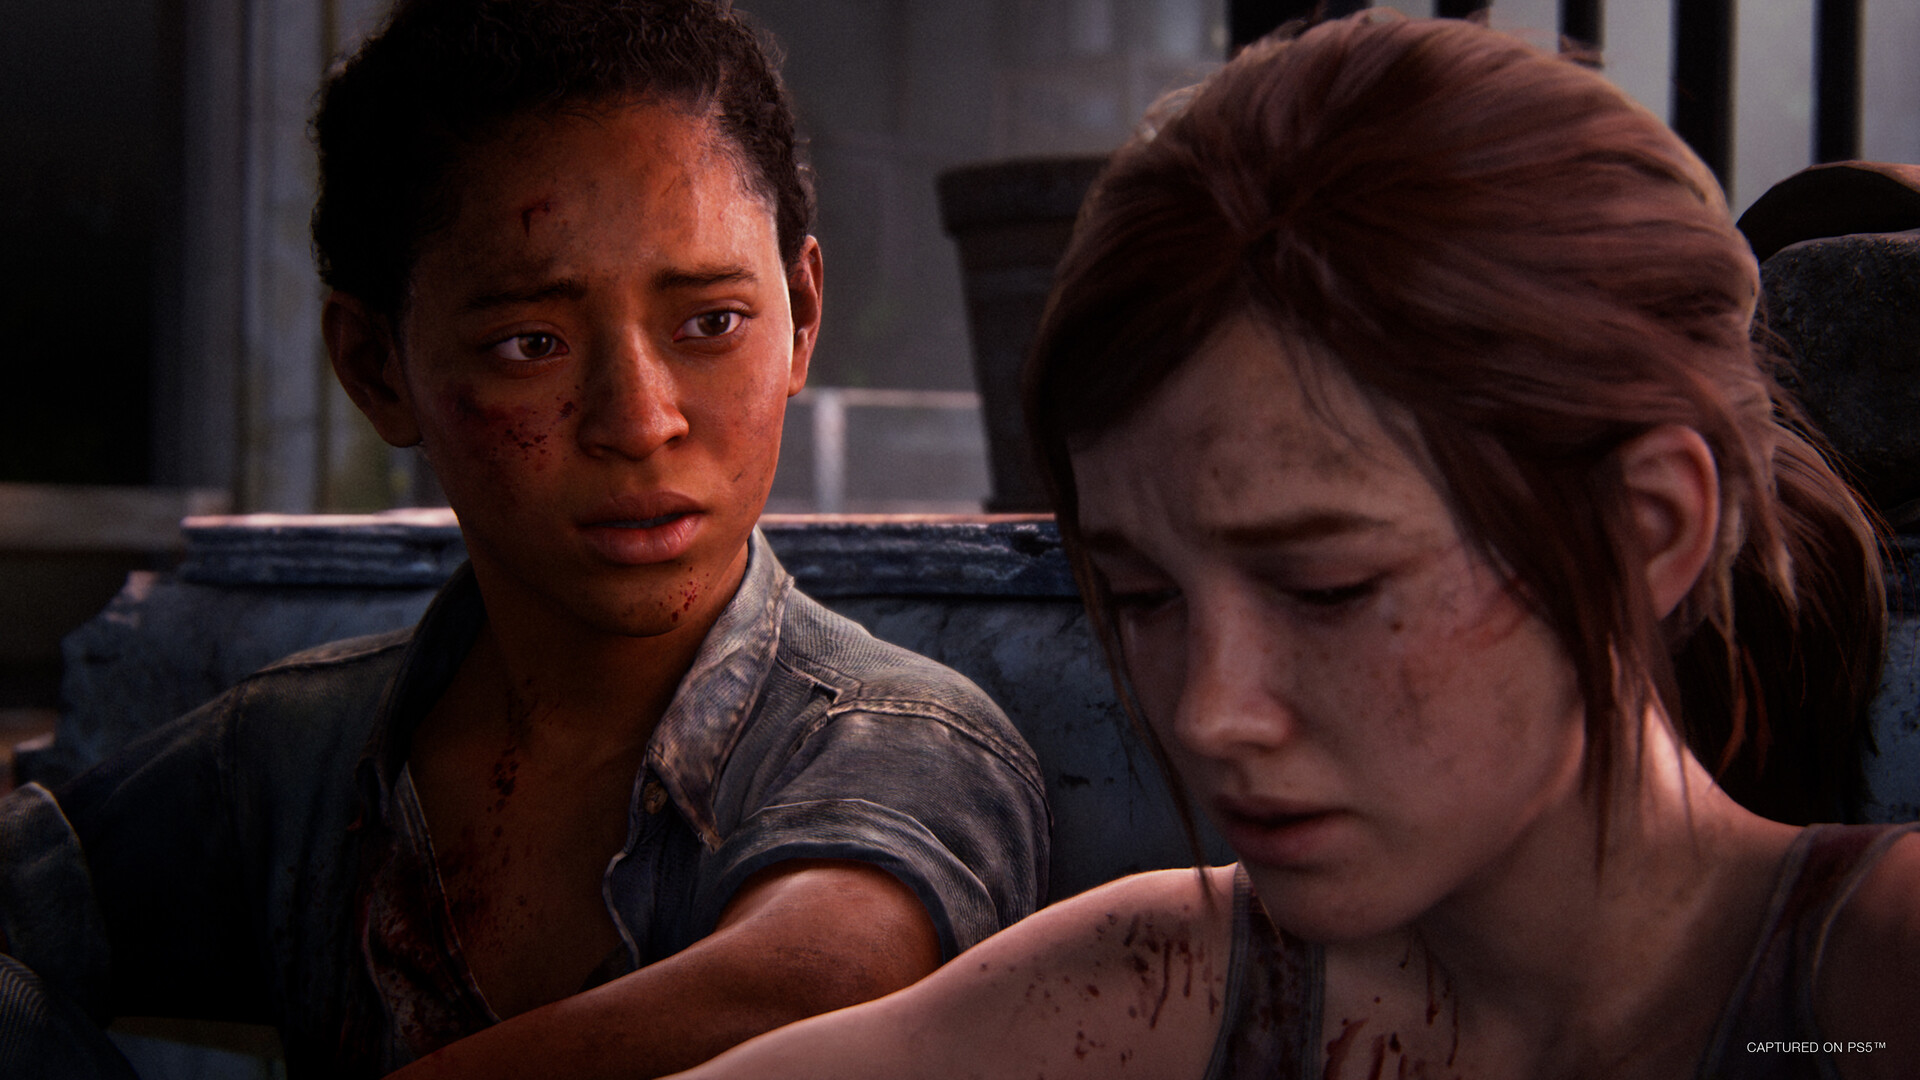 The Last of Us Part 1 PC Release Date Delayed a Few Weeks - Siliconera